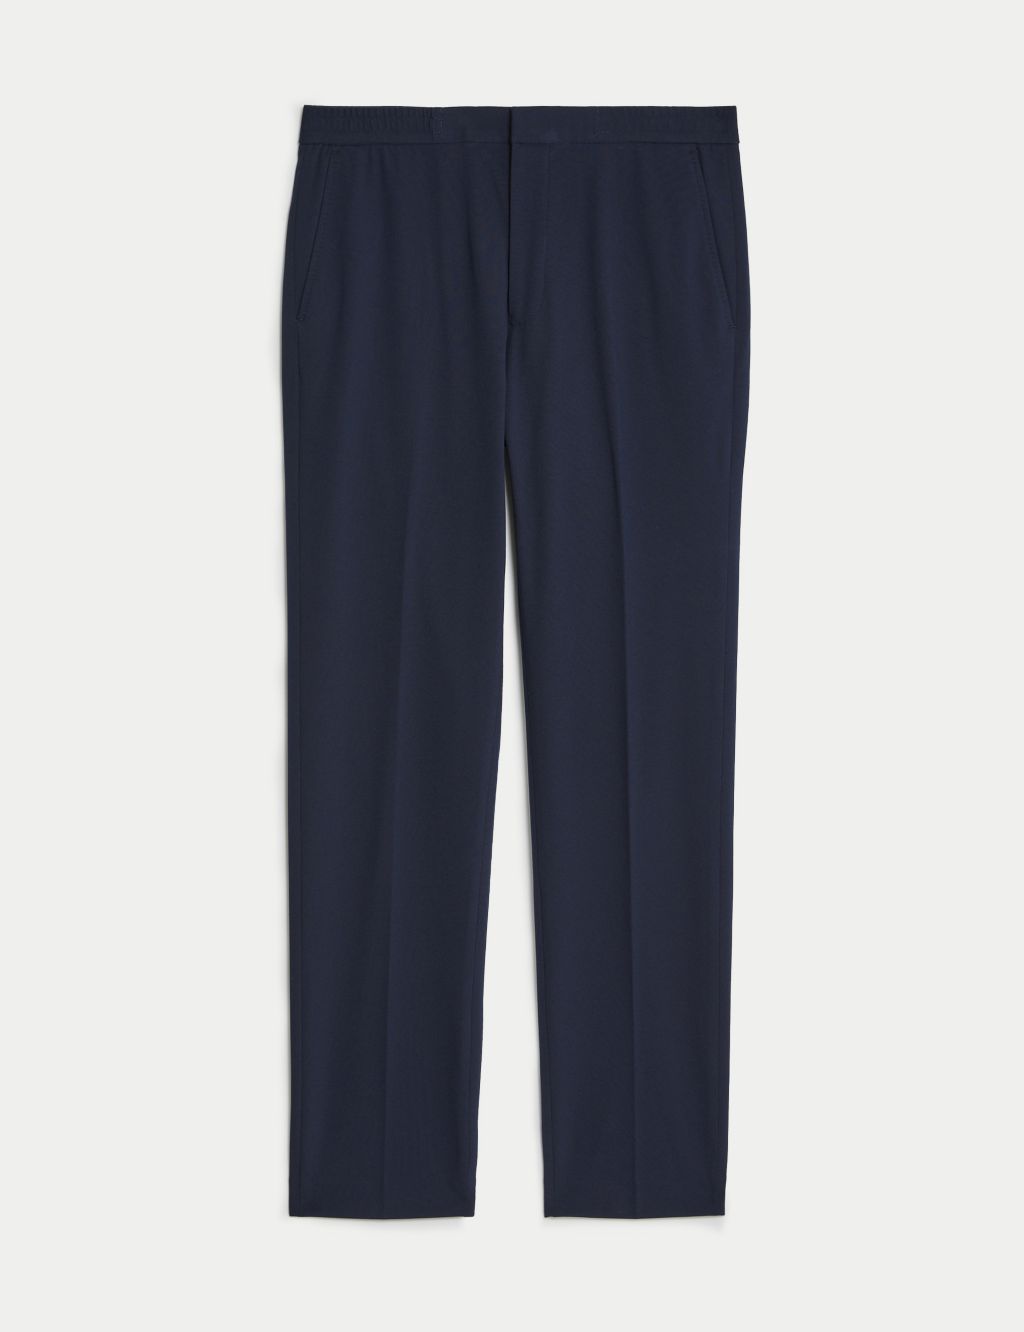 Jersey Flat Front Stretch Trousers image 9